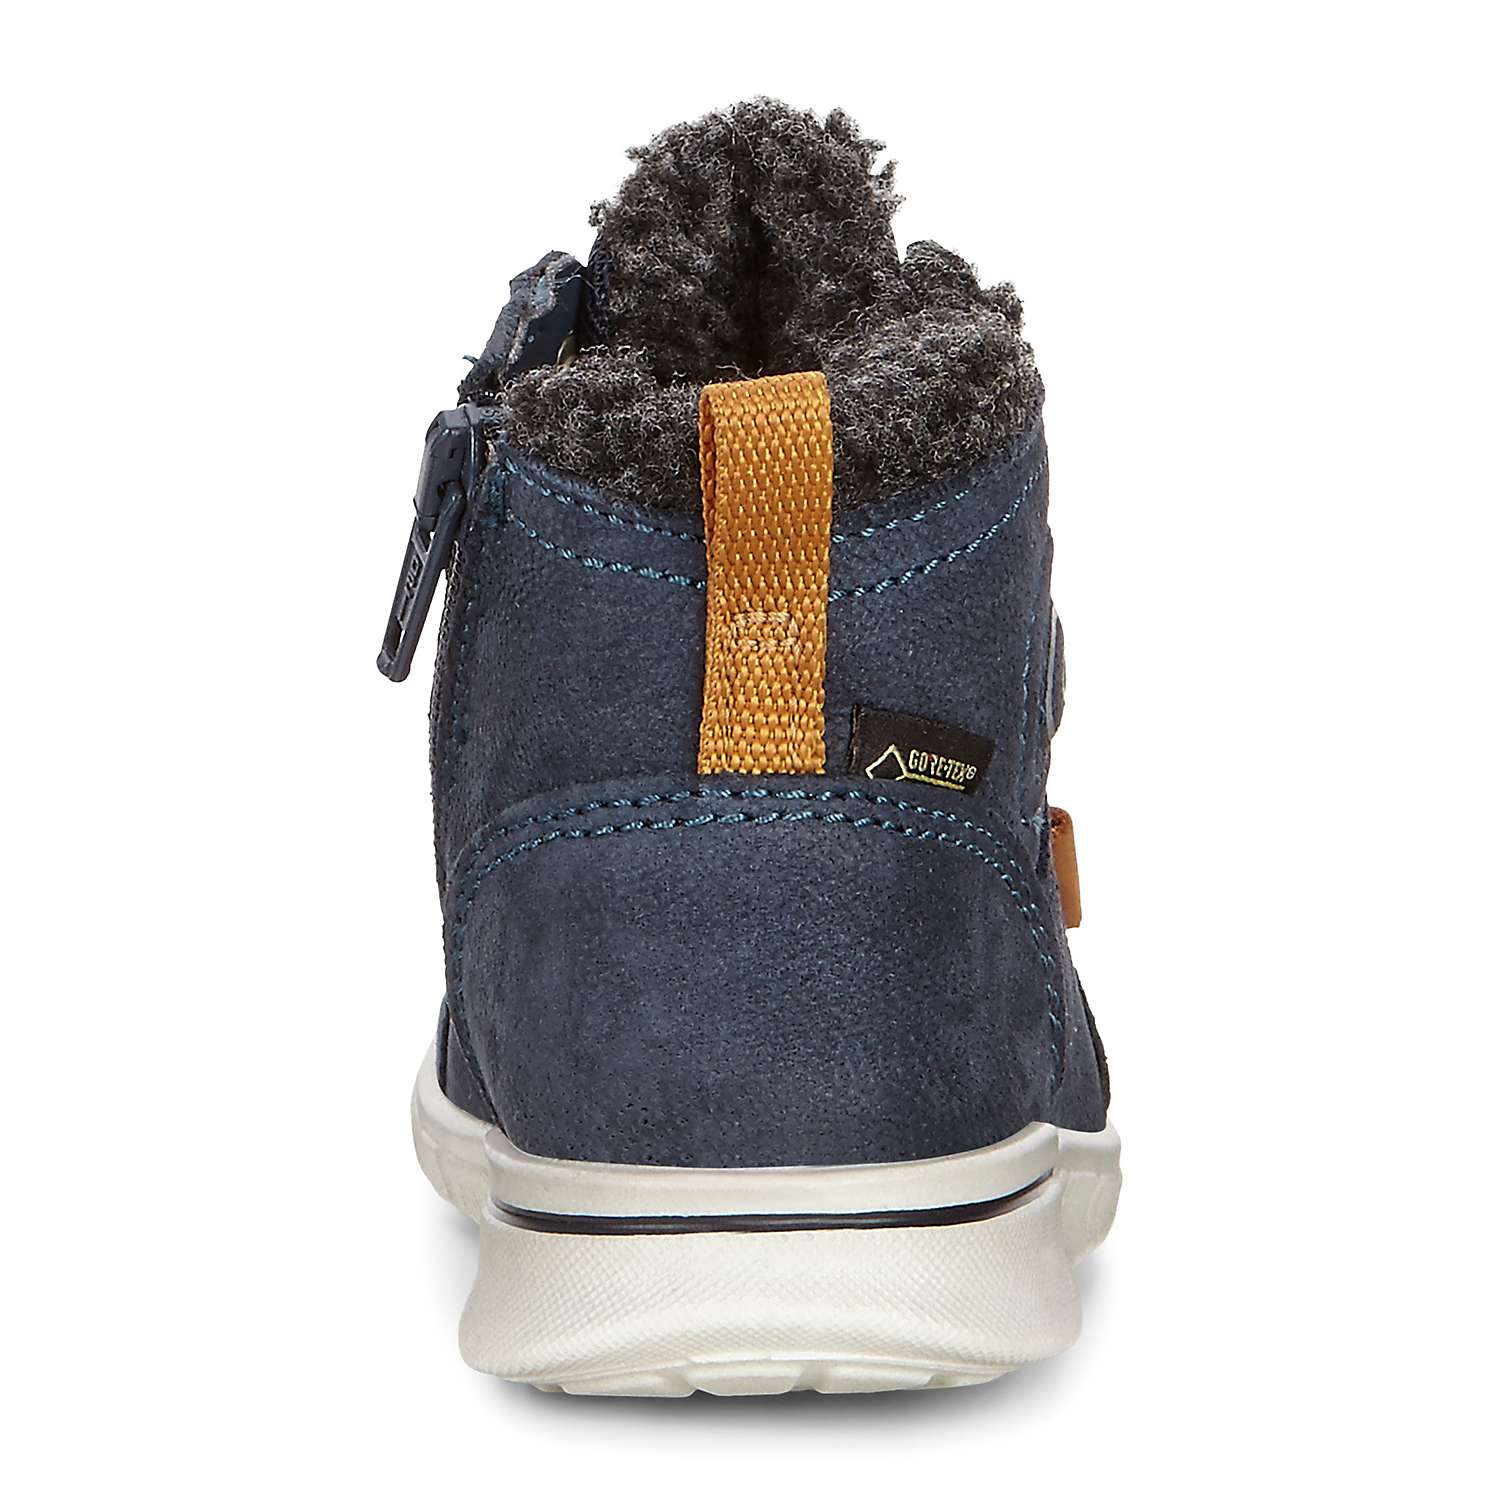 Buy ECCO Children's First Lace-Up Trainers Online at johnlewis.com